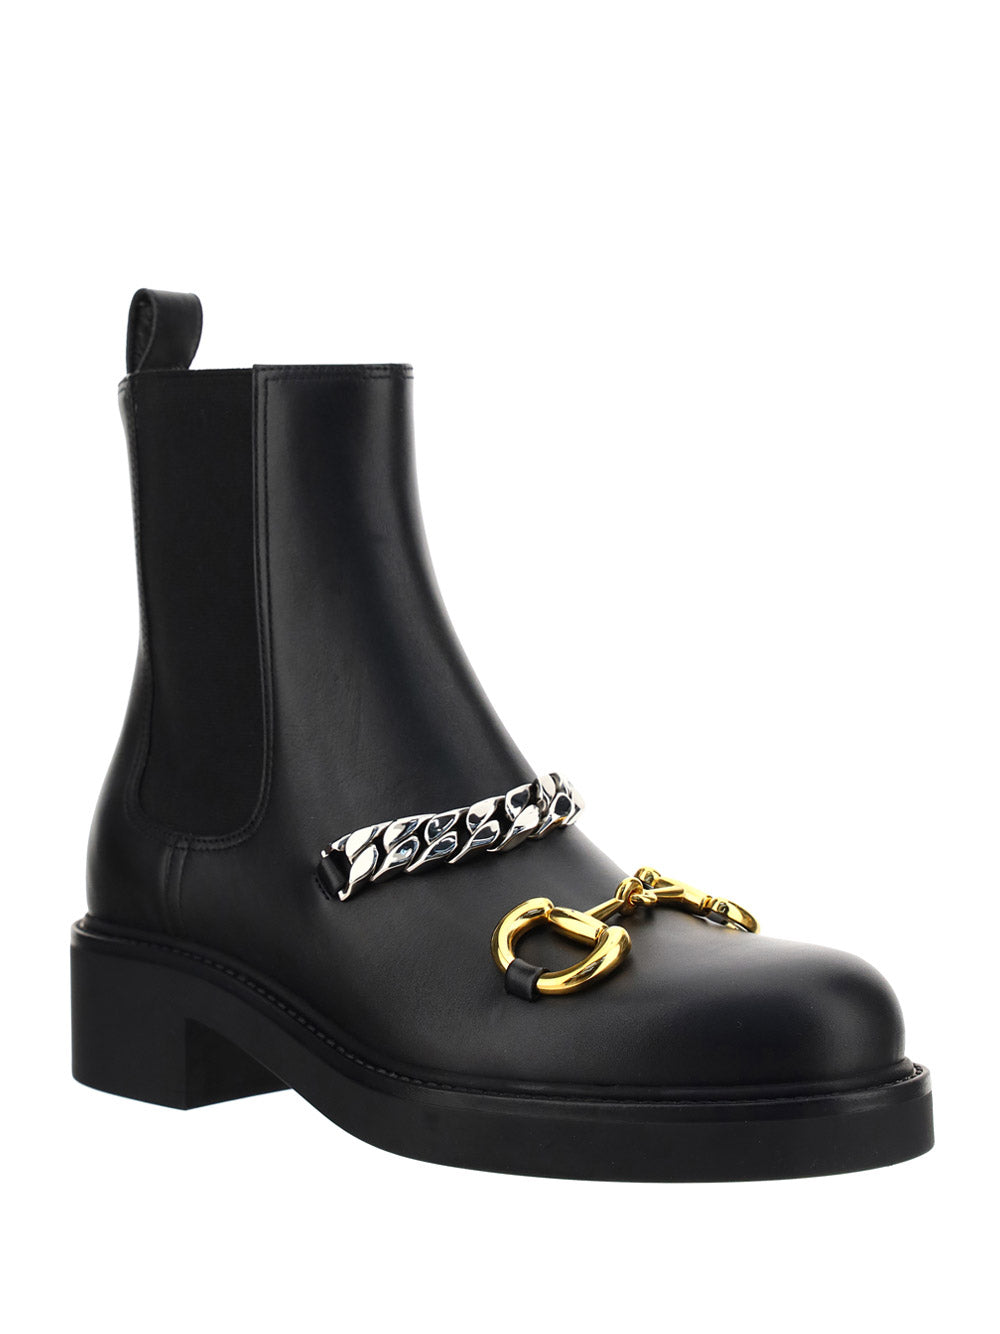 Chelsea Boot with Chain - Black.